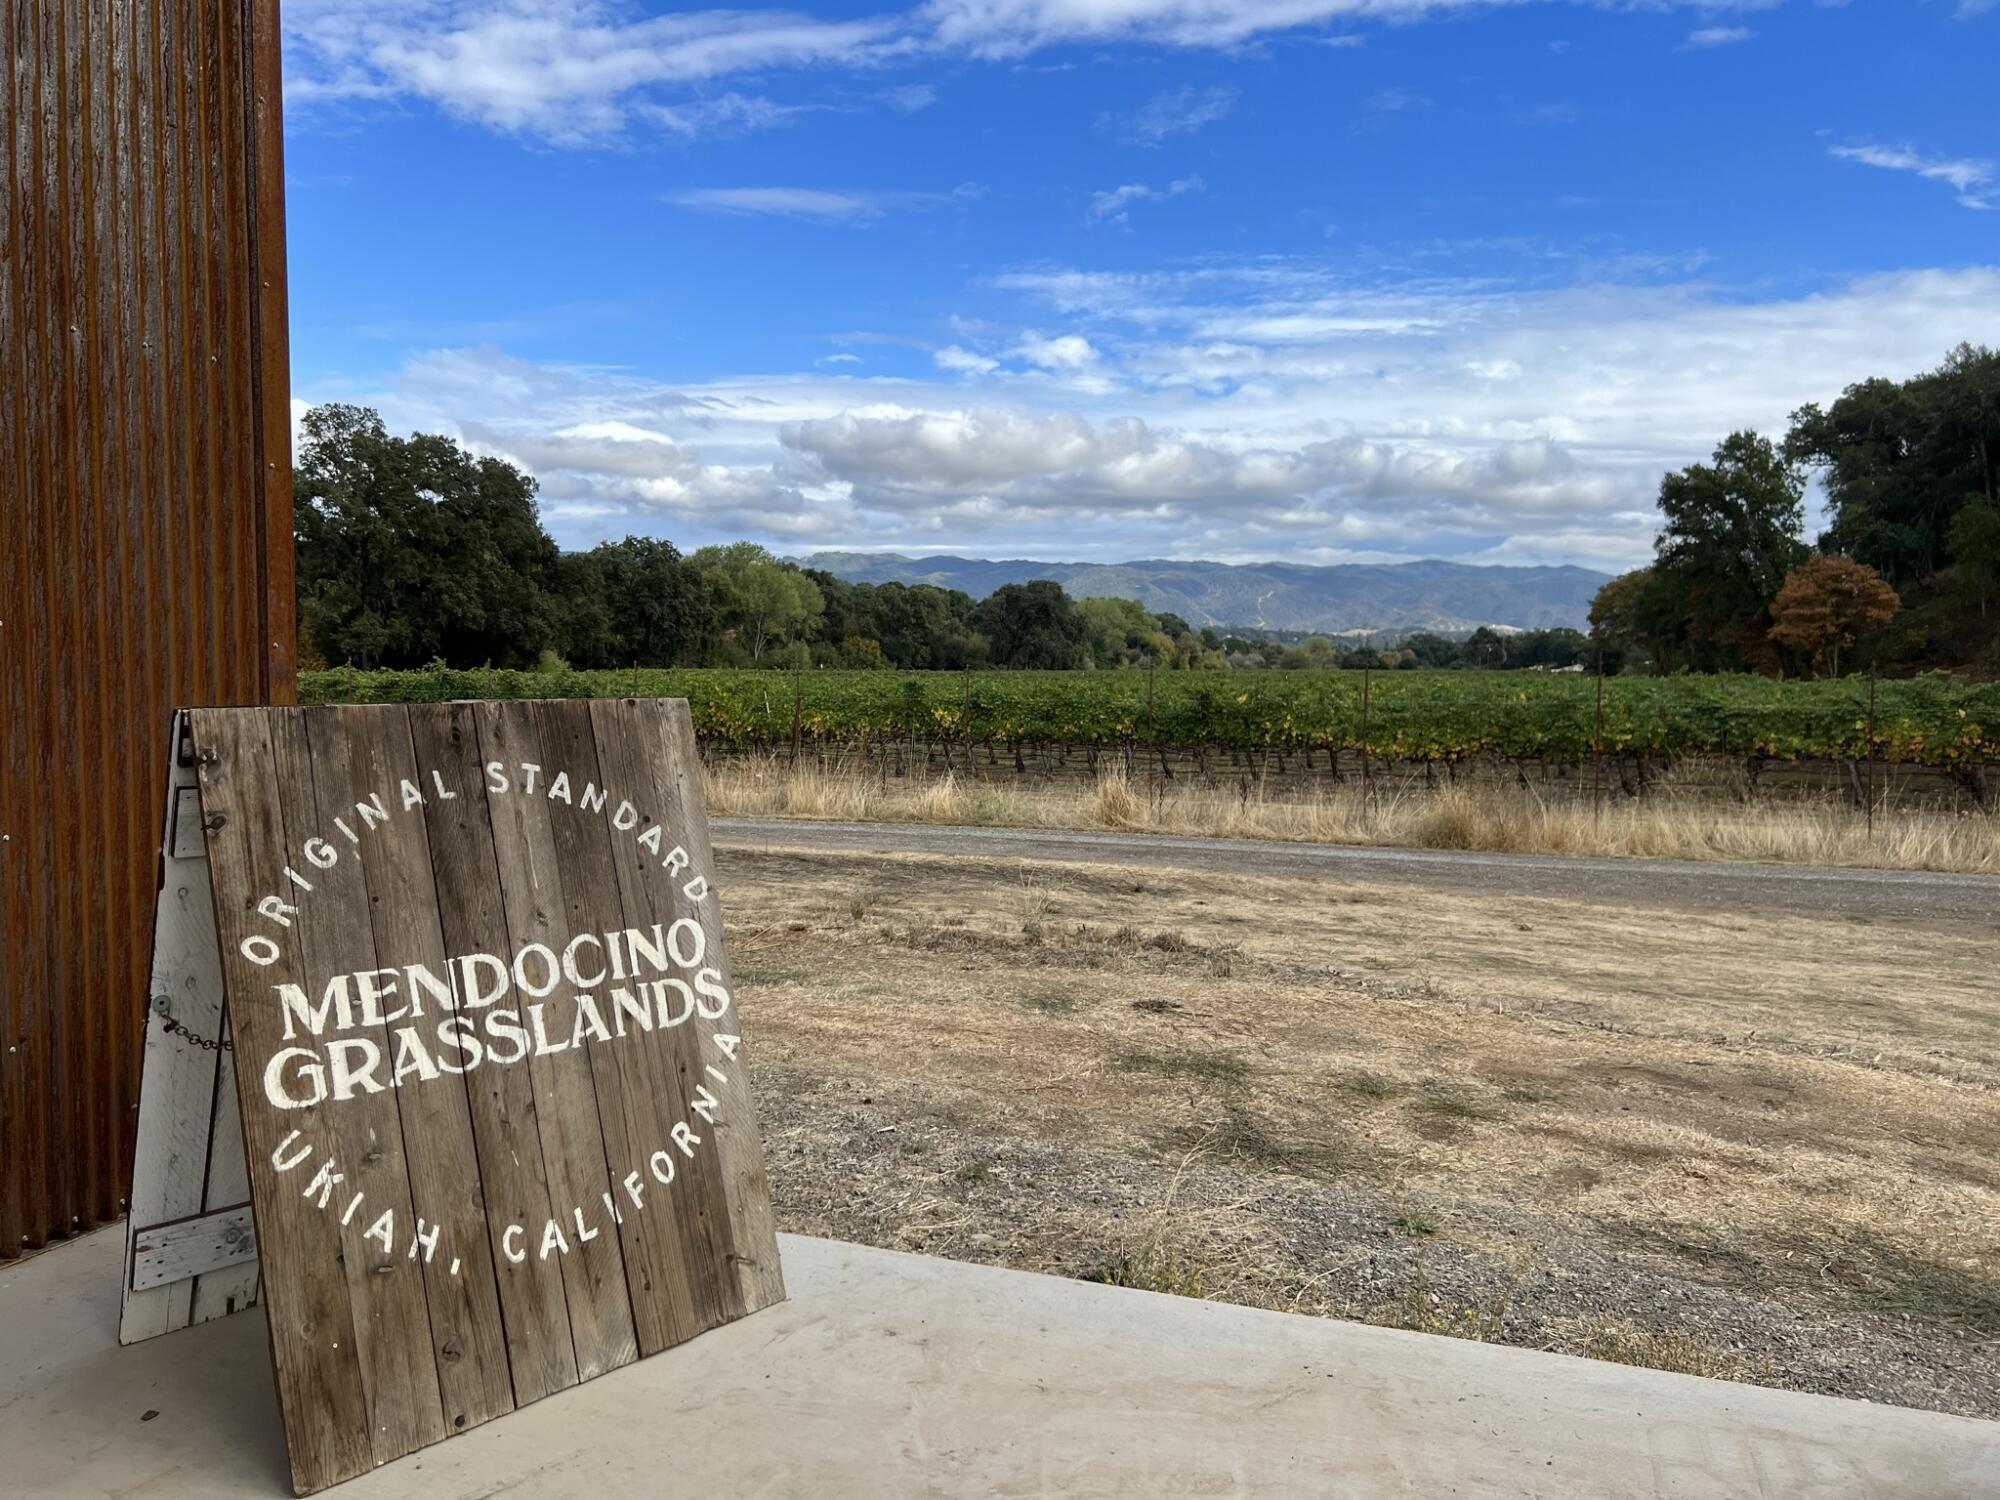 A field of grapevines in the background with a weathered wooden sign that reads Mendocino Grasslands.